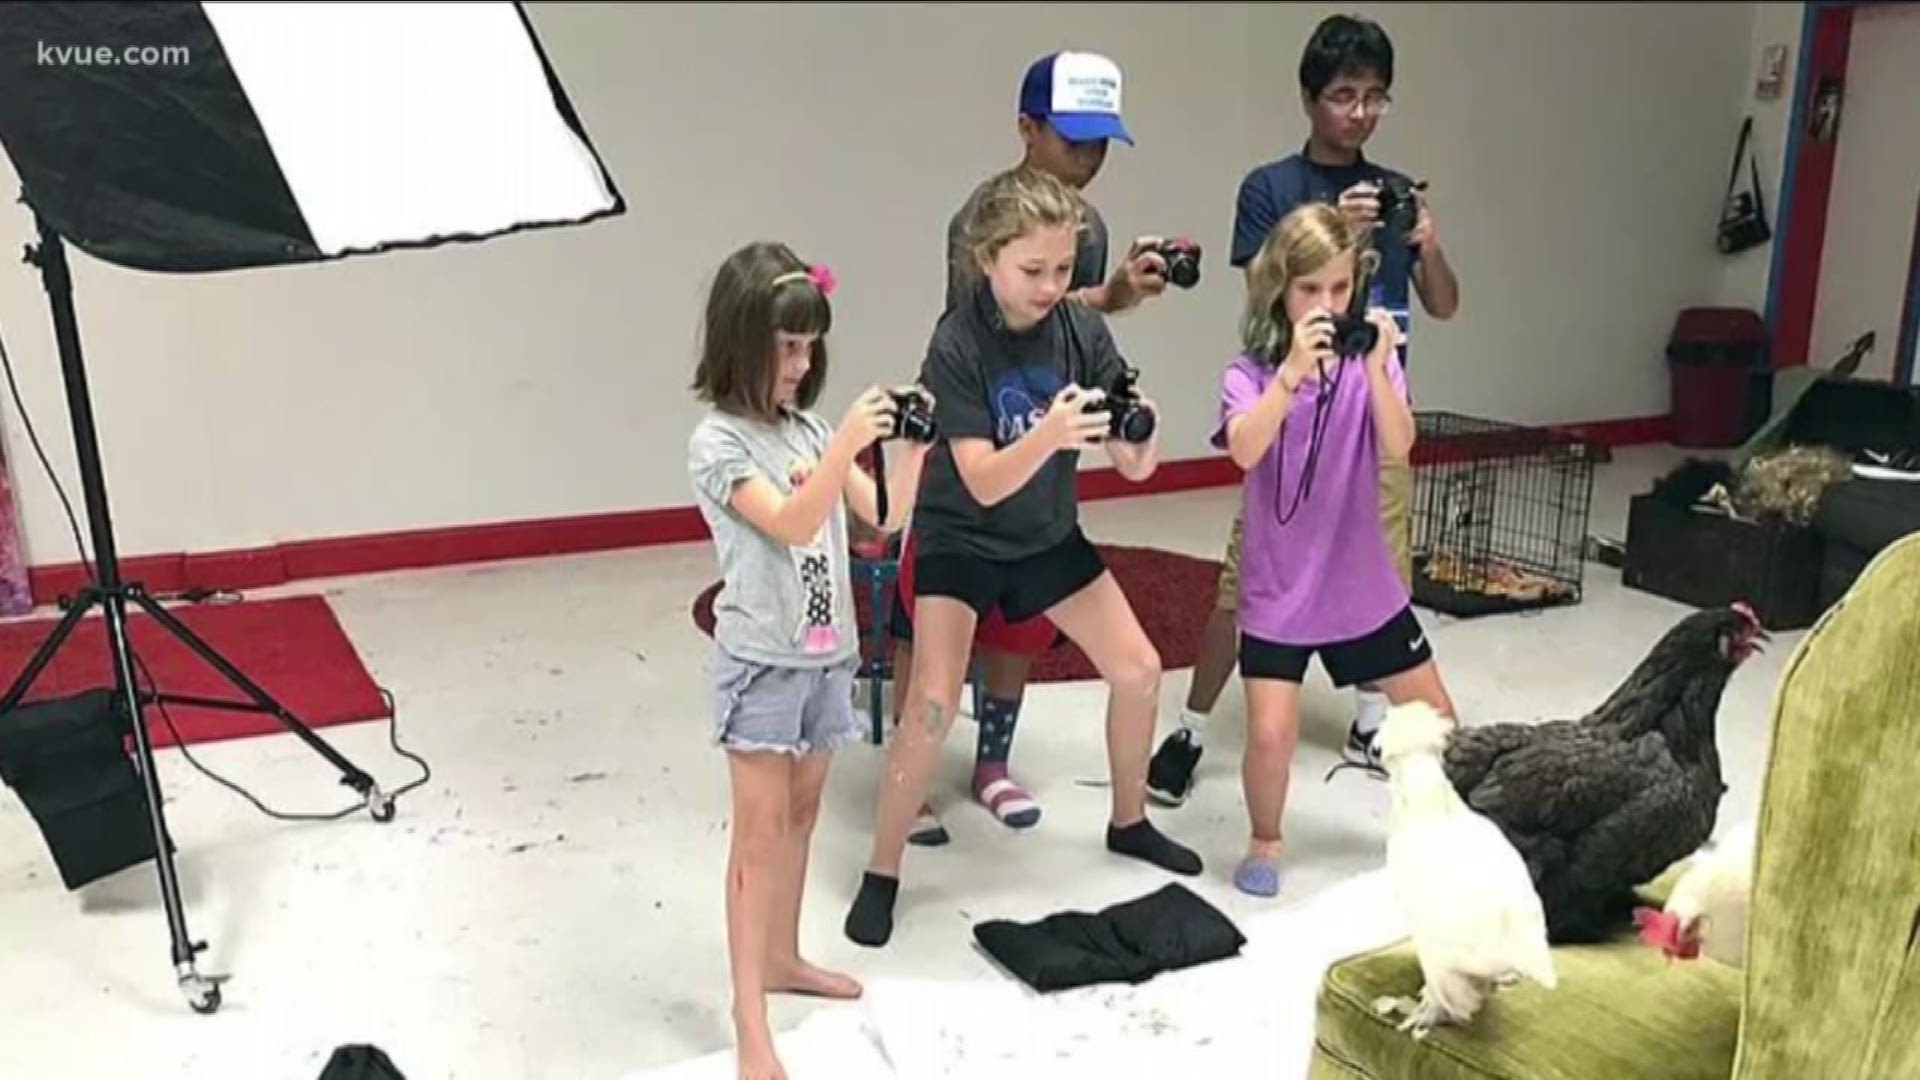 Young people with an eye for photography have a chance to hone their picture-taking skills once again this summer at the Shutter Bugs summer camp in South Austin.